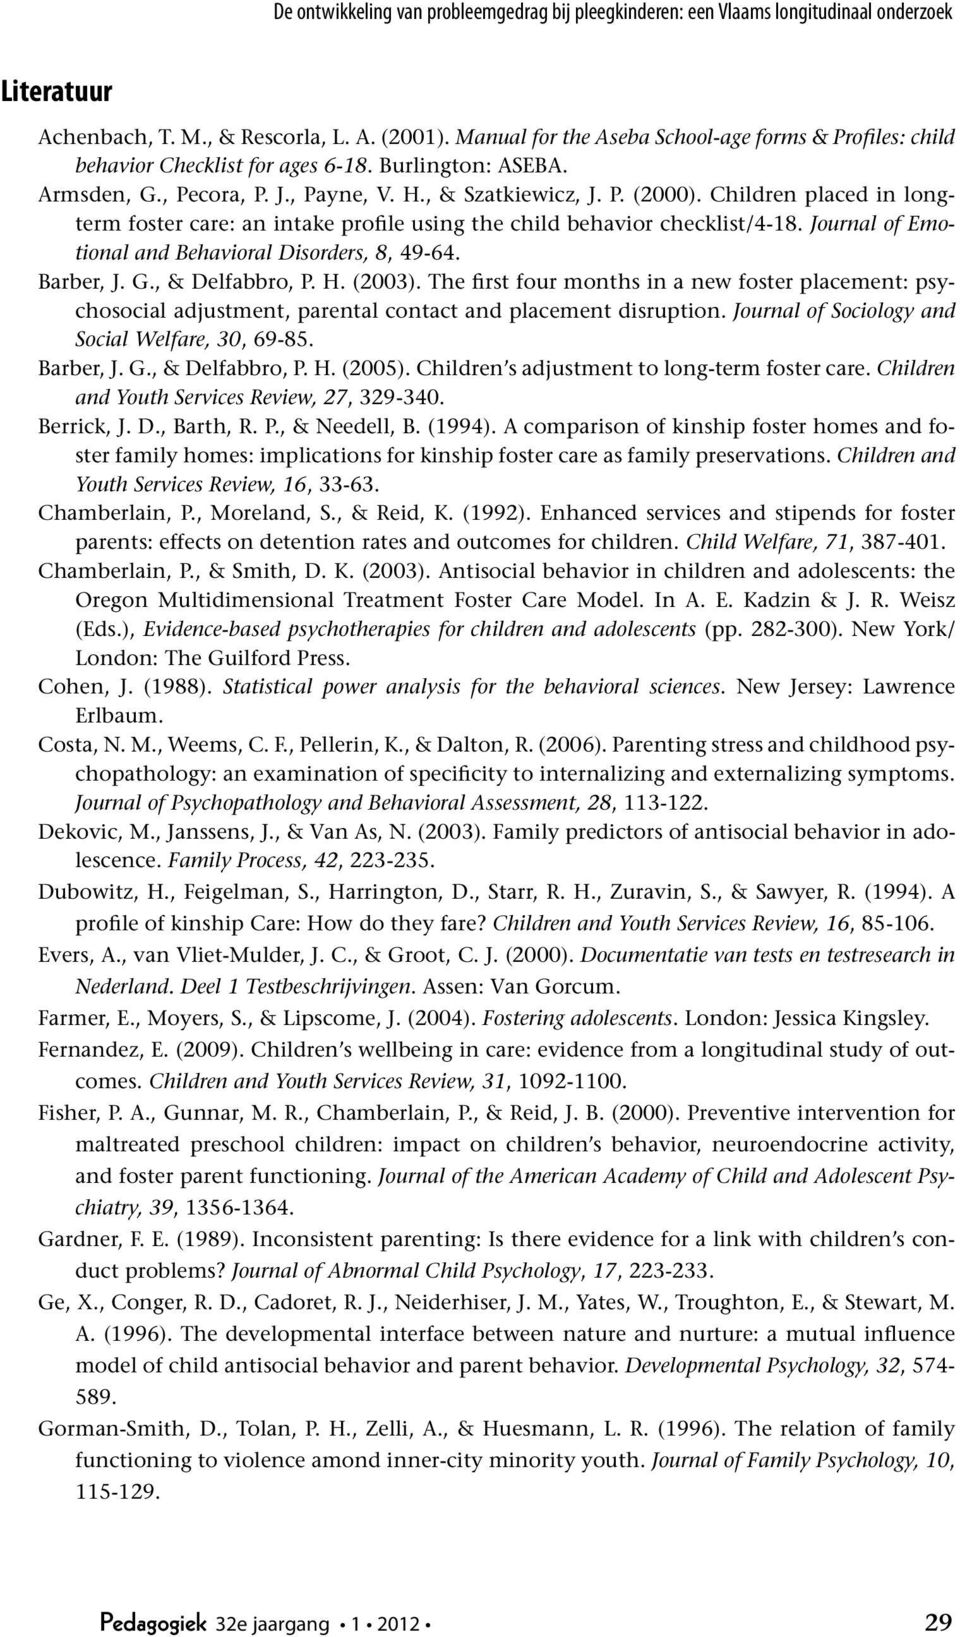 Children placed in longterm foster care: an intake profile using the child behavior checklist/4-18. Journal of Emotional and Behavioral Disorders, 8, 49-64. Barber, J. G., & Delfabbro, P. H. (2003).